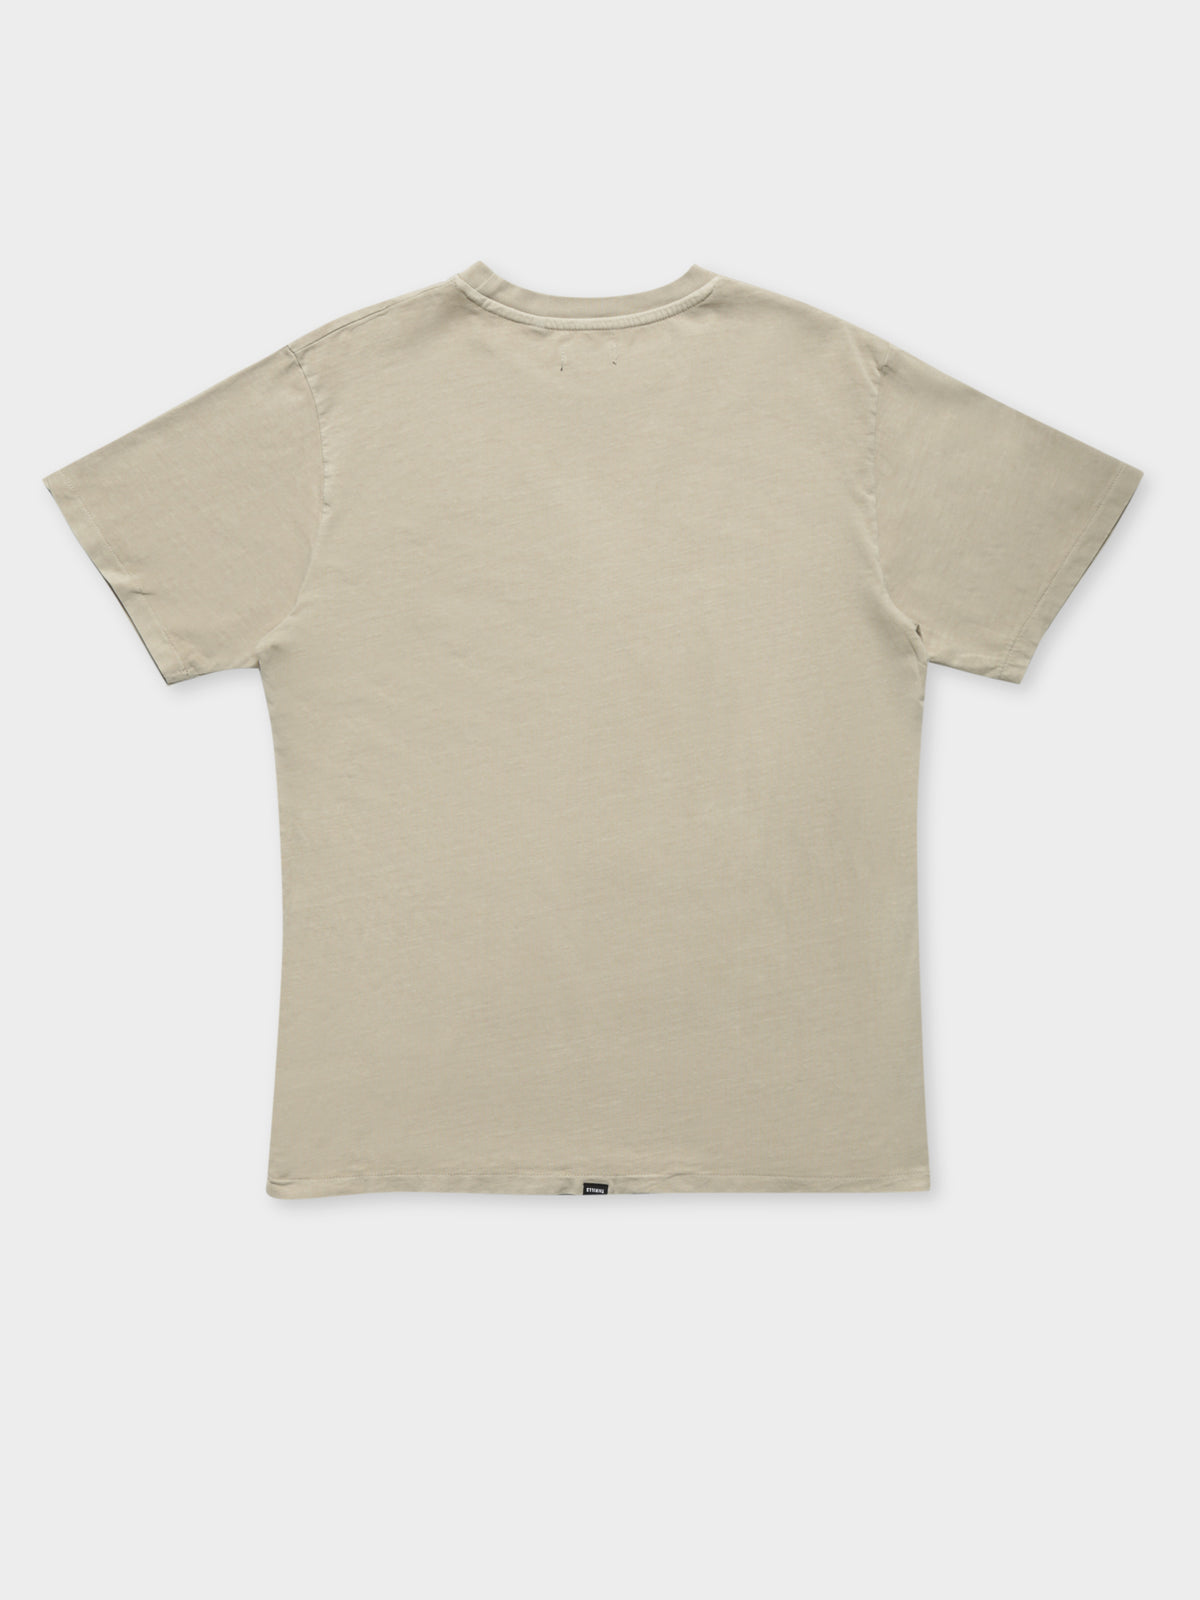 Company Alignment Merch Fit Tee in Aged Tan